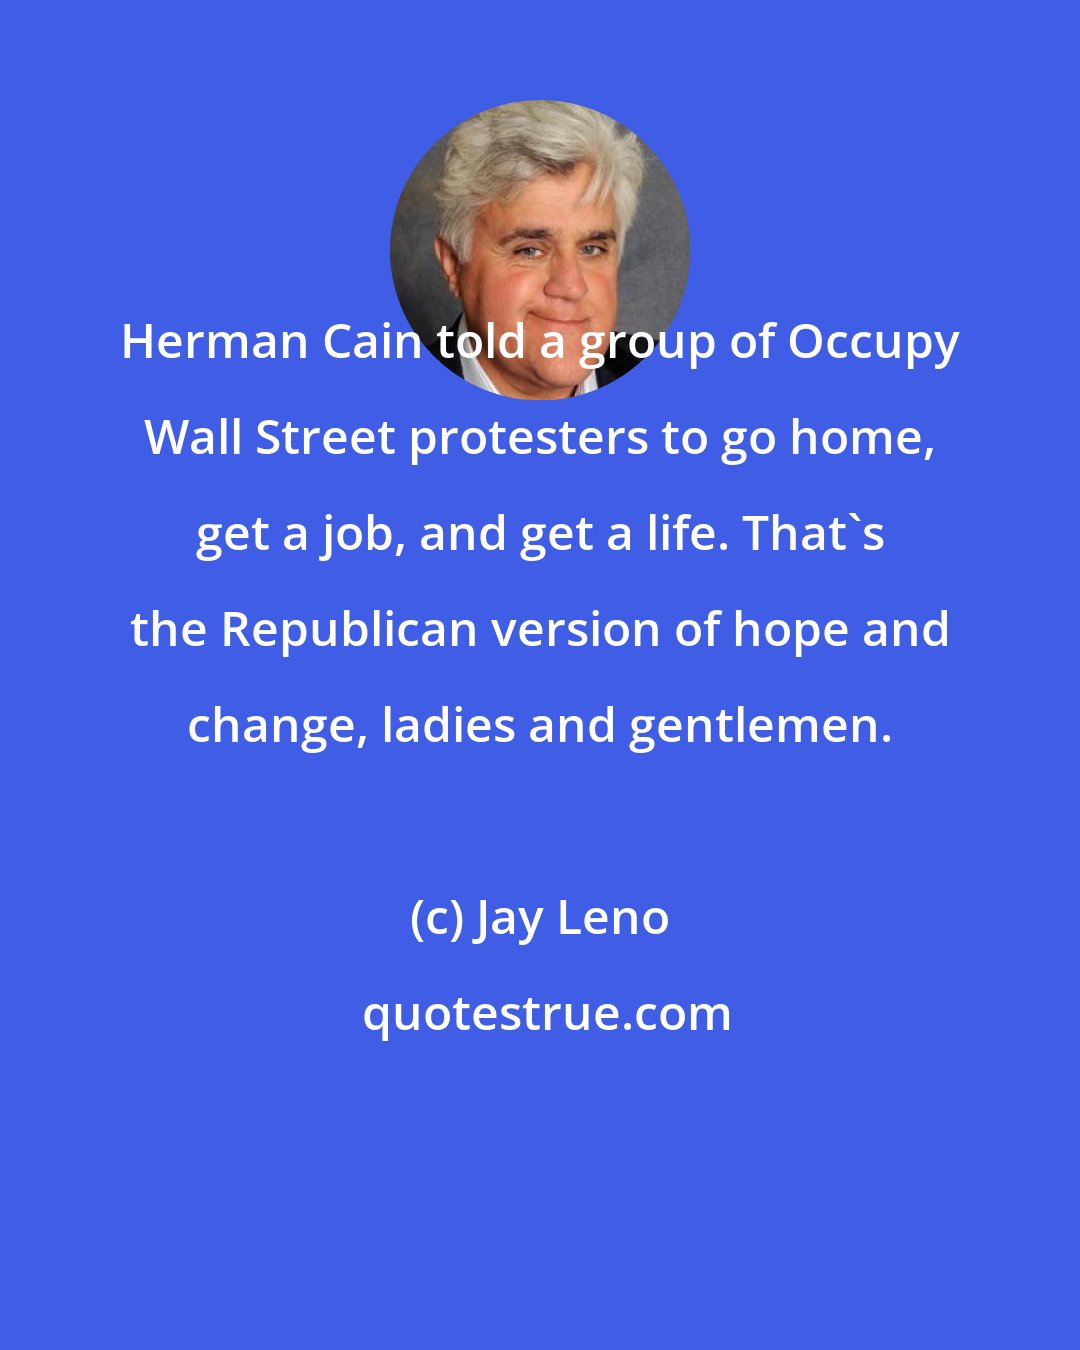 Jay Leno: Herman Cain told a group of Occupy Wall Street protesters to go home, get a job, and get a life. That's the Republican version of hope and change, ladies and gentlemen.